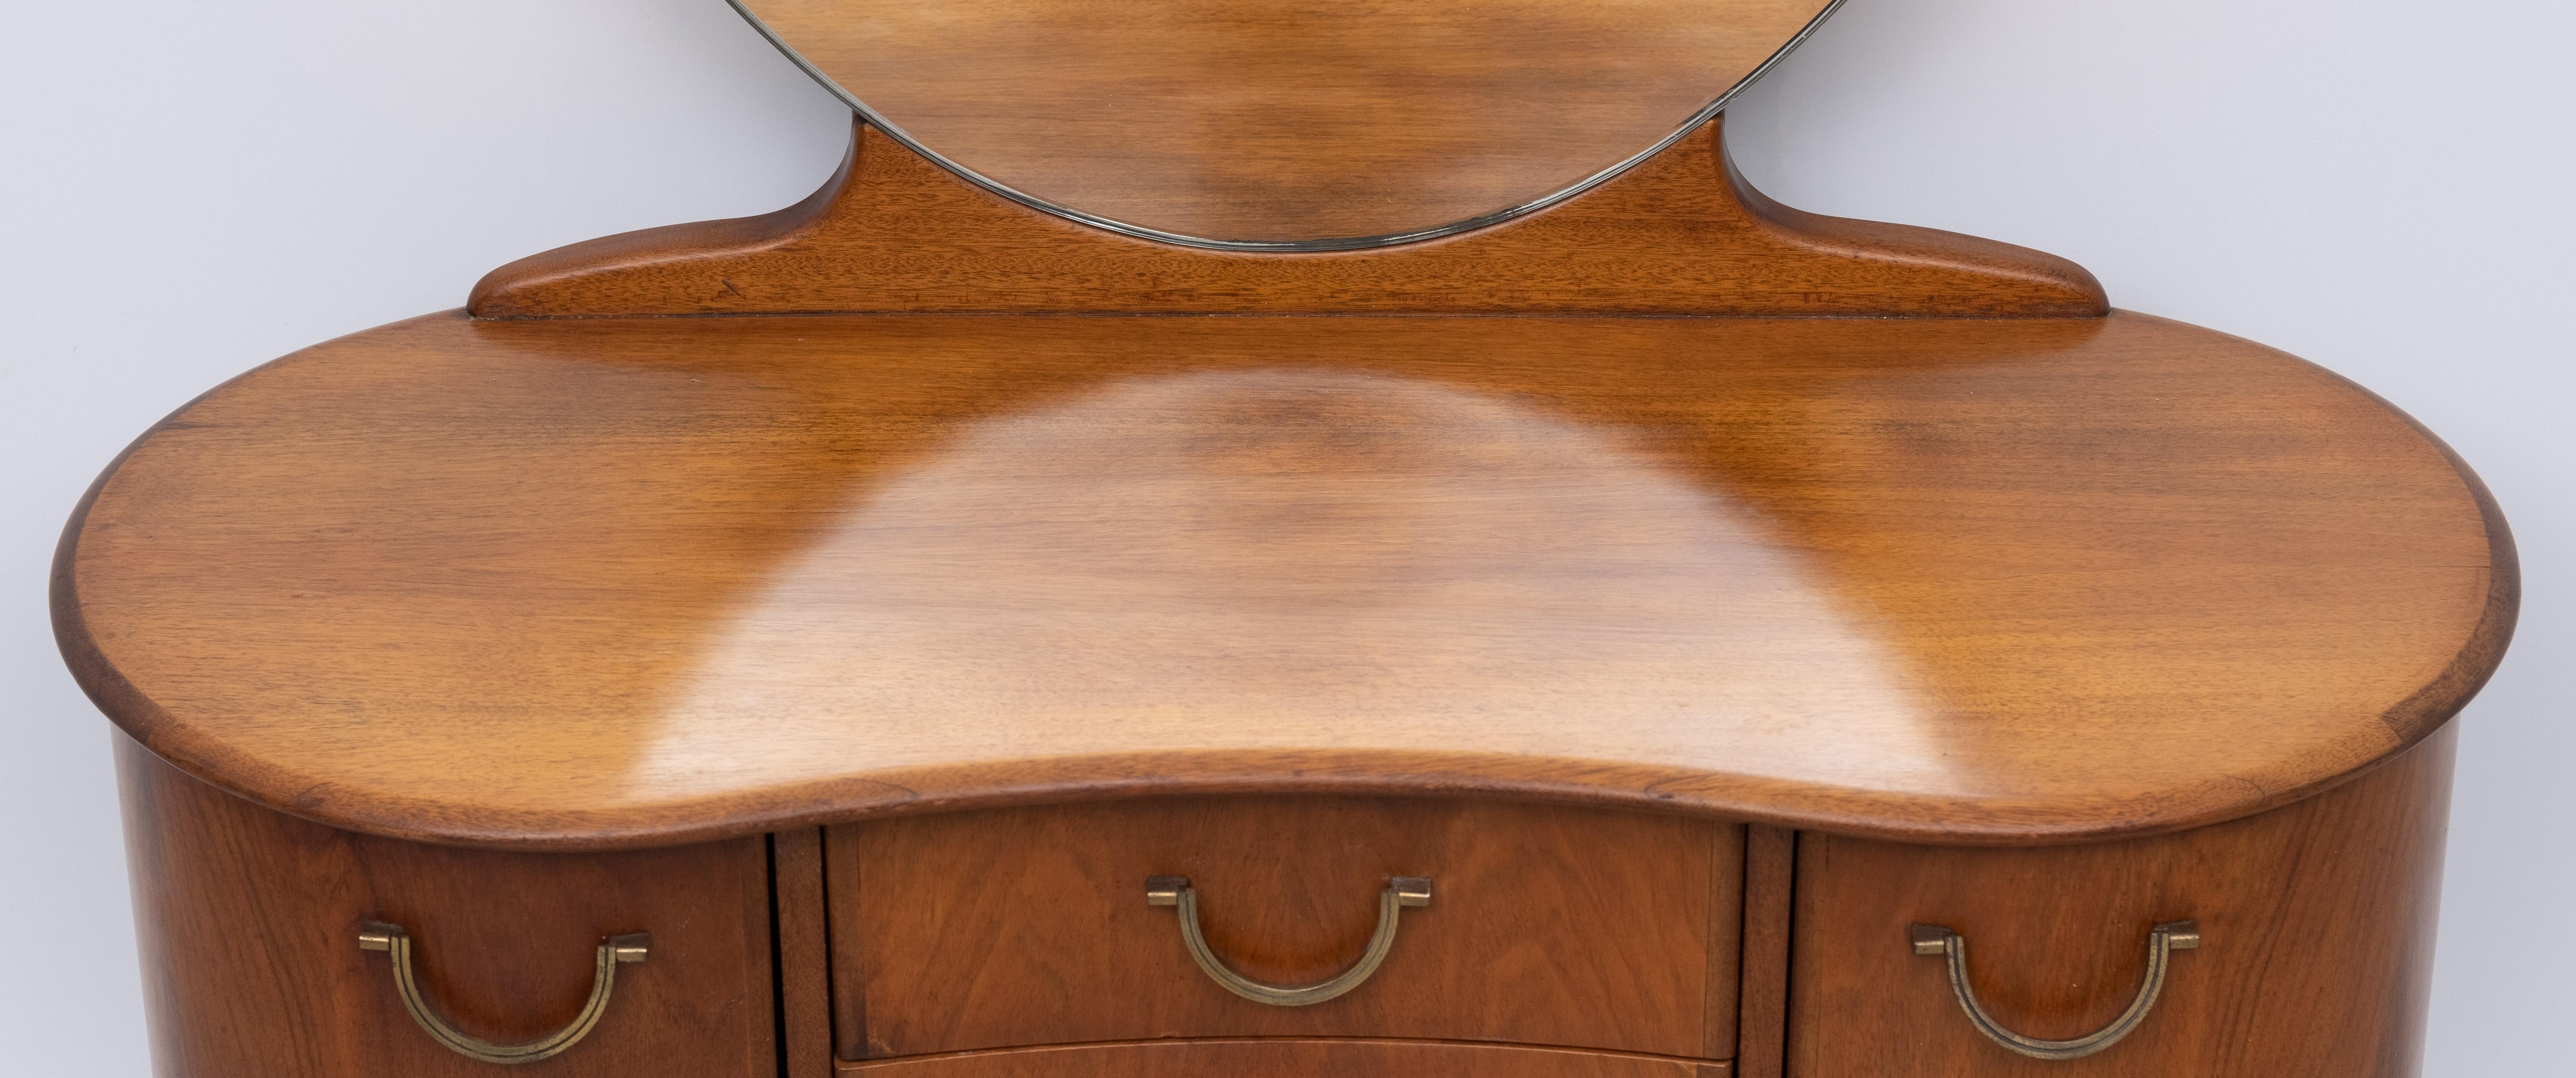 Nutwood A A Patijn Curved Dressing Table, 1950s, Holland